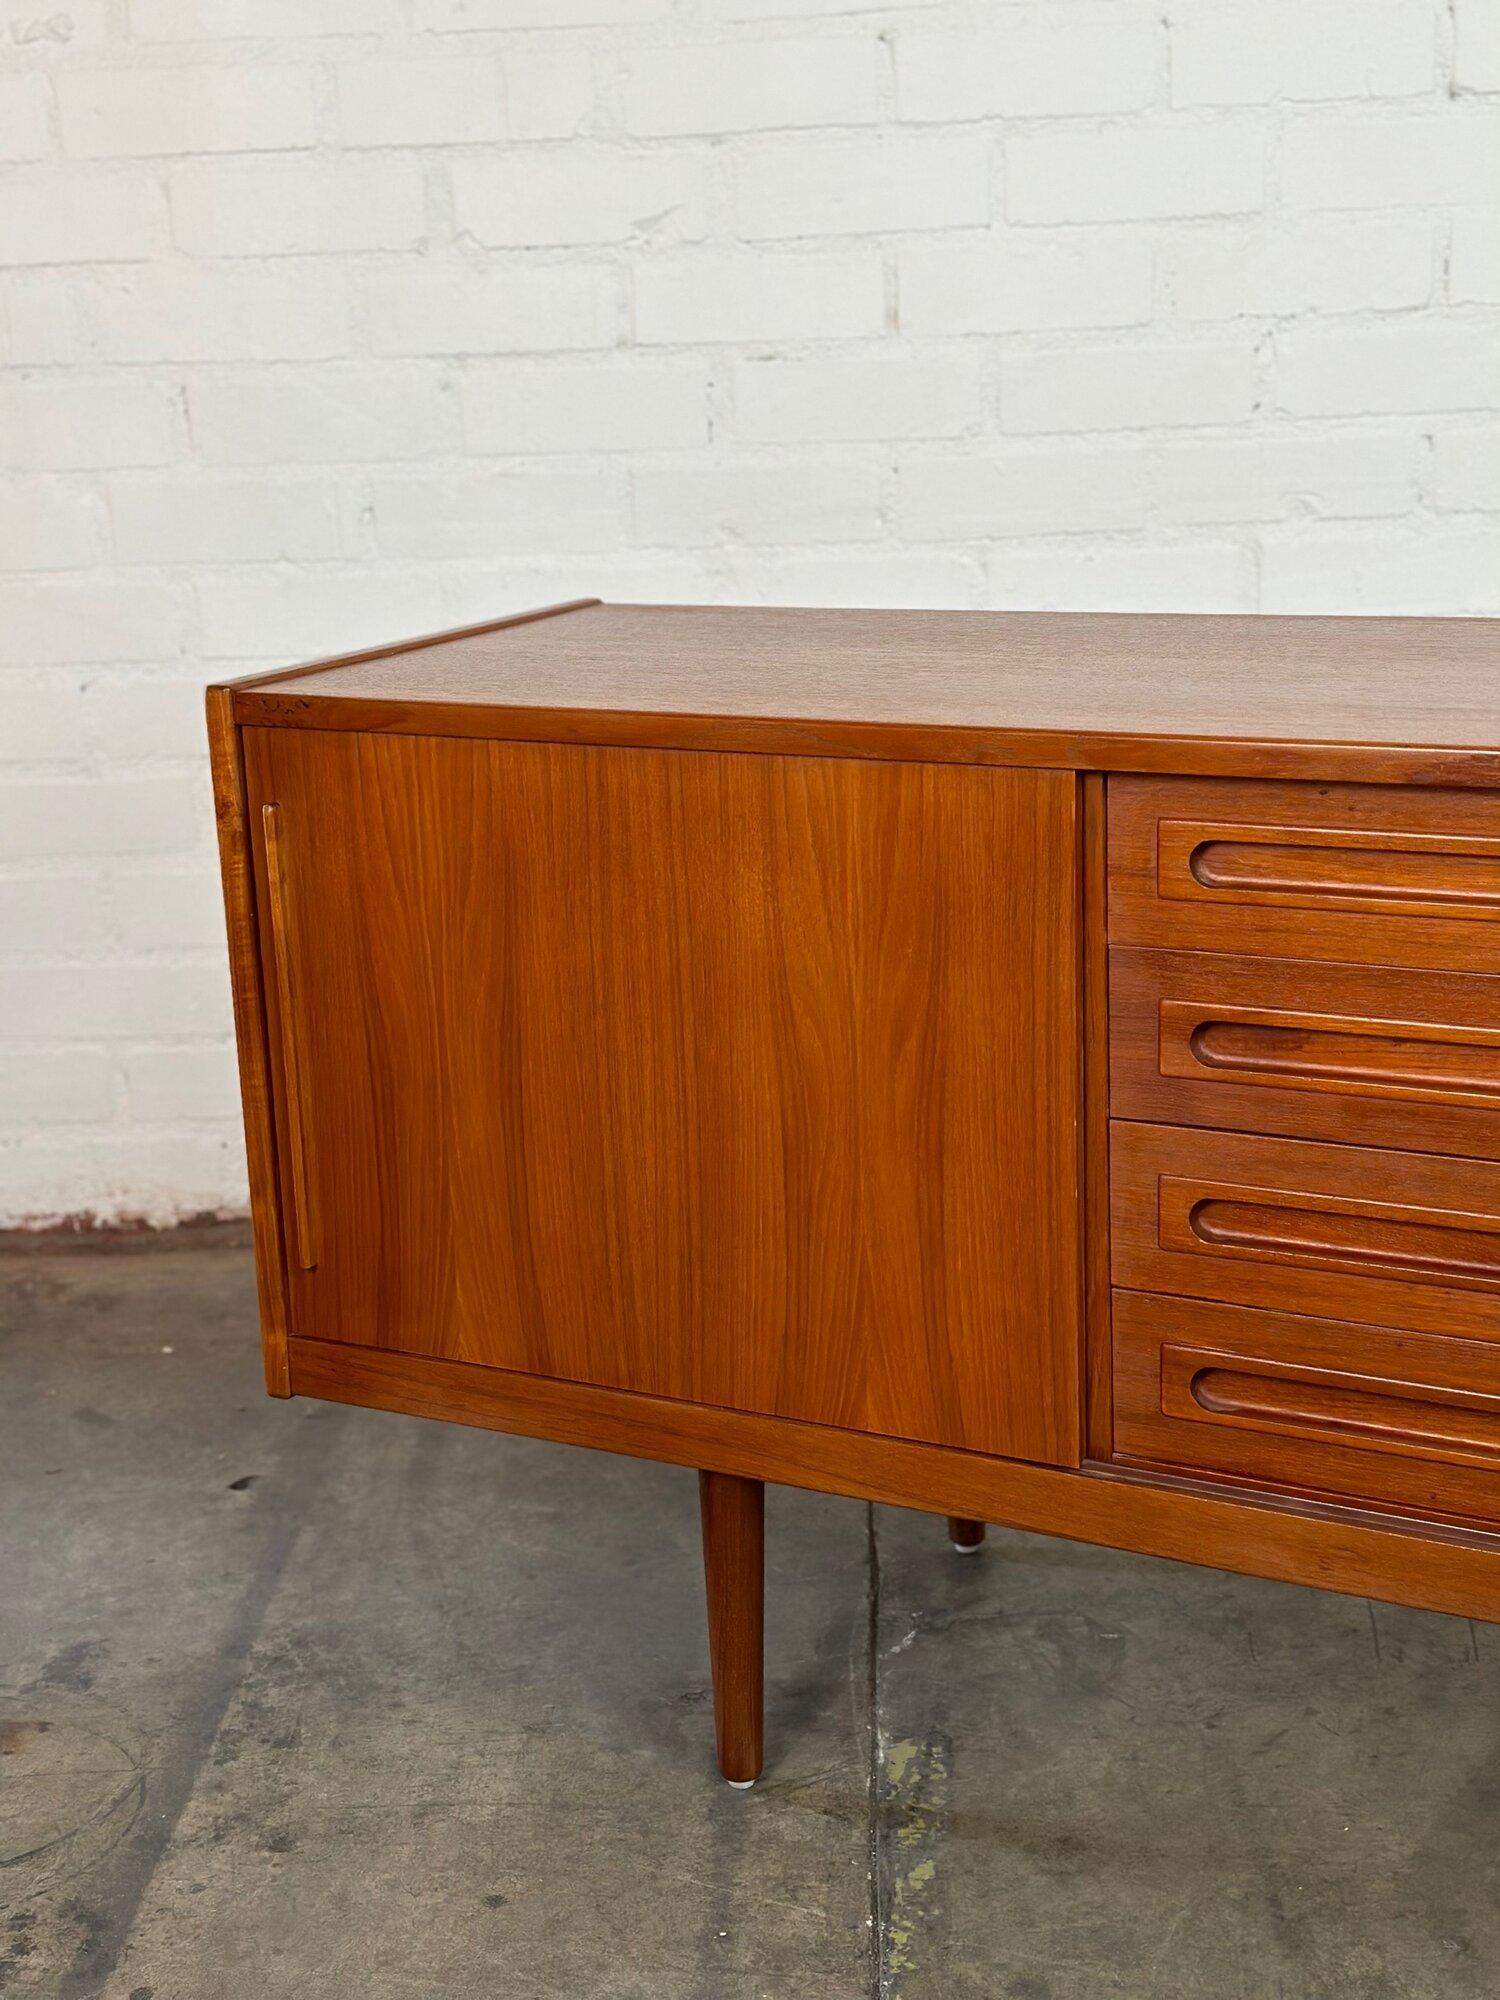 W79 D19.75 H30.5

Sideboard in fully restored condition in Teak. Item is structurally and sturdy with no major areas of wear. Sideboard features sculpted pulls, and is finished on all sides.